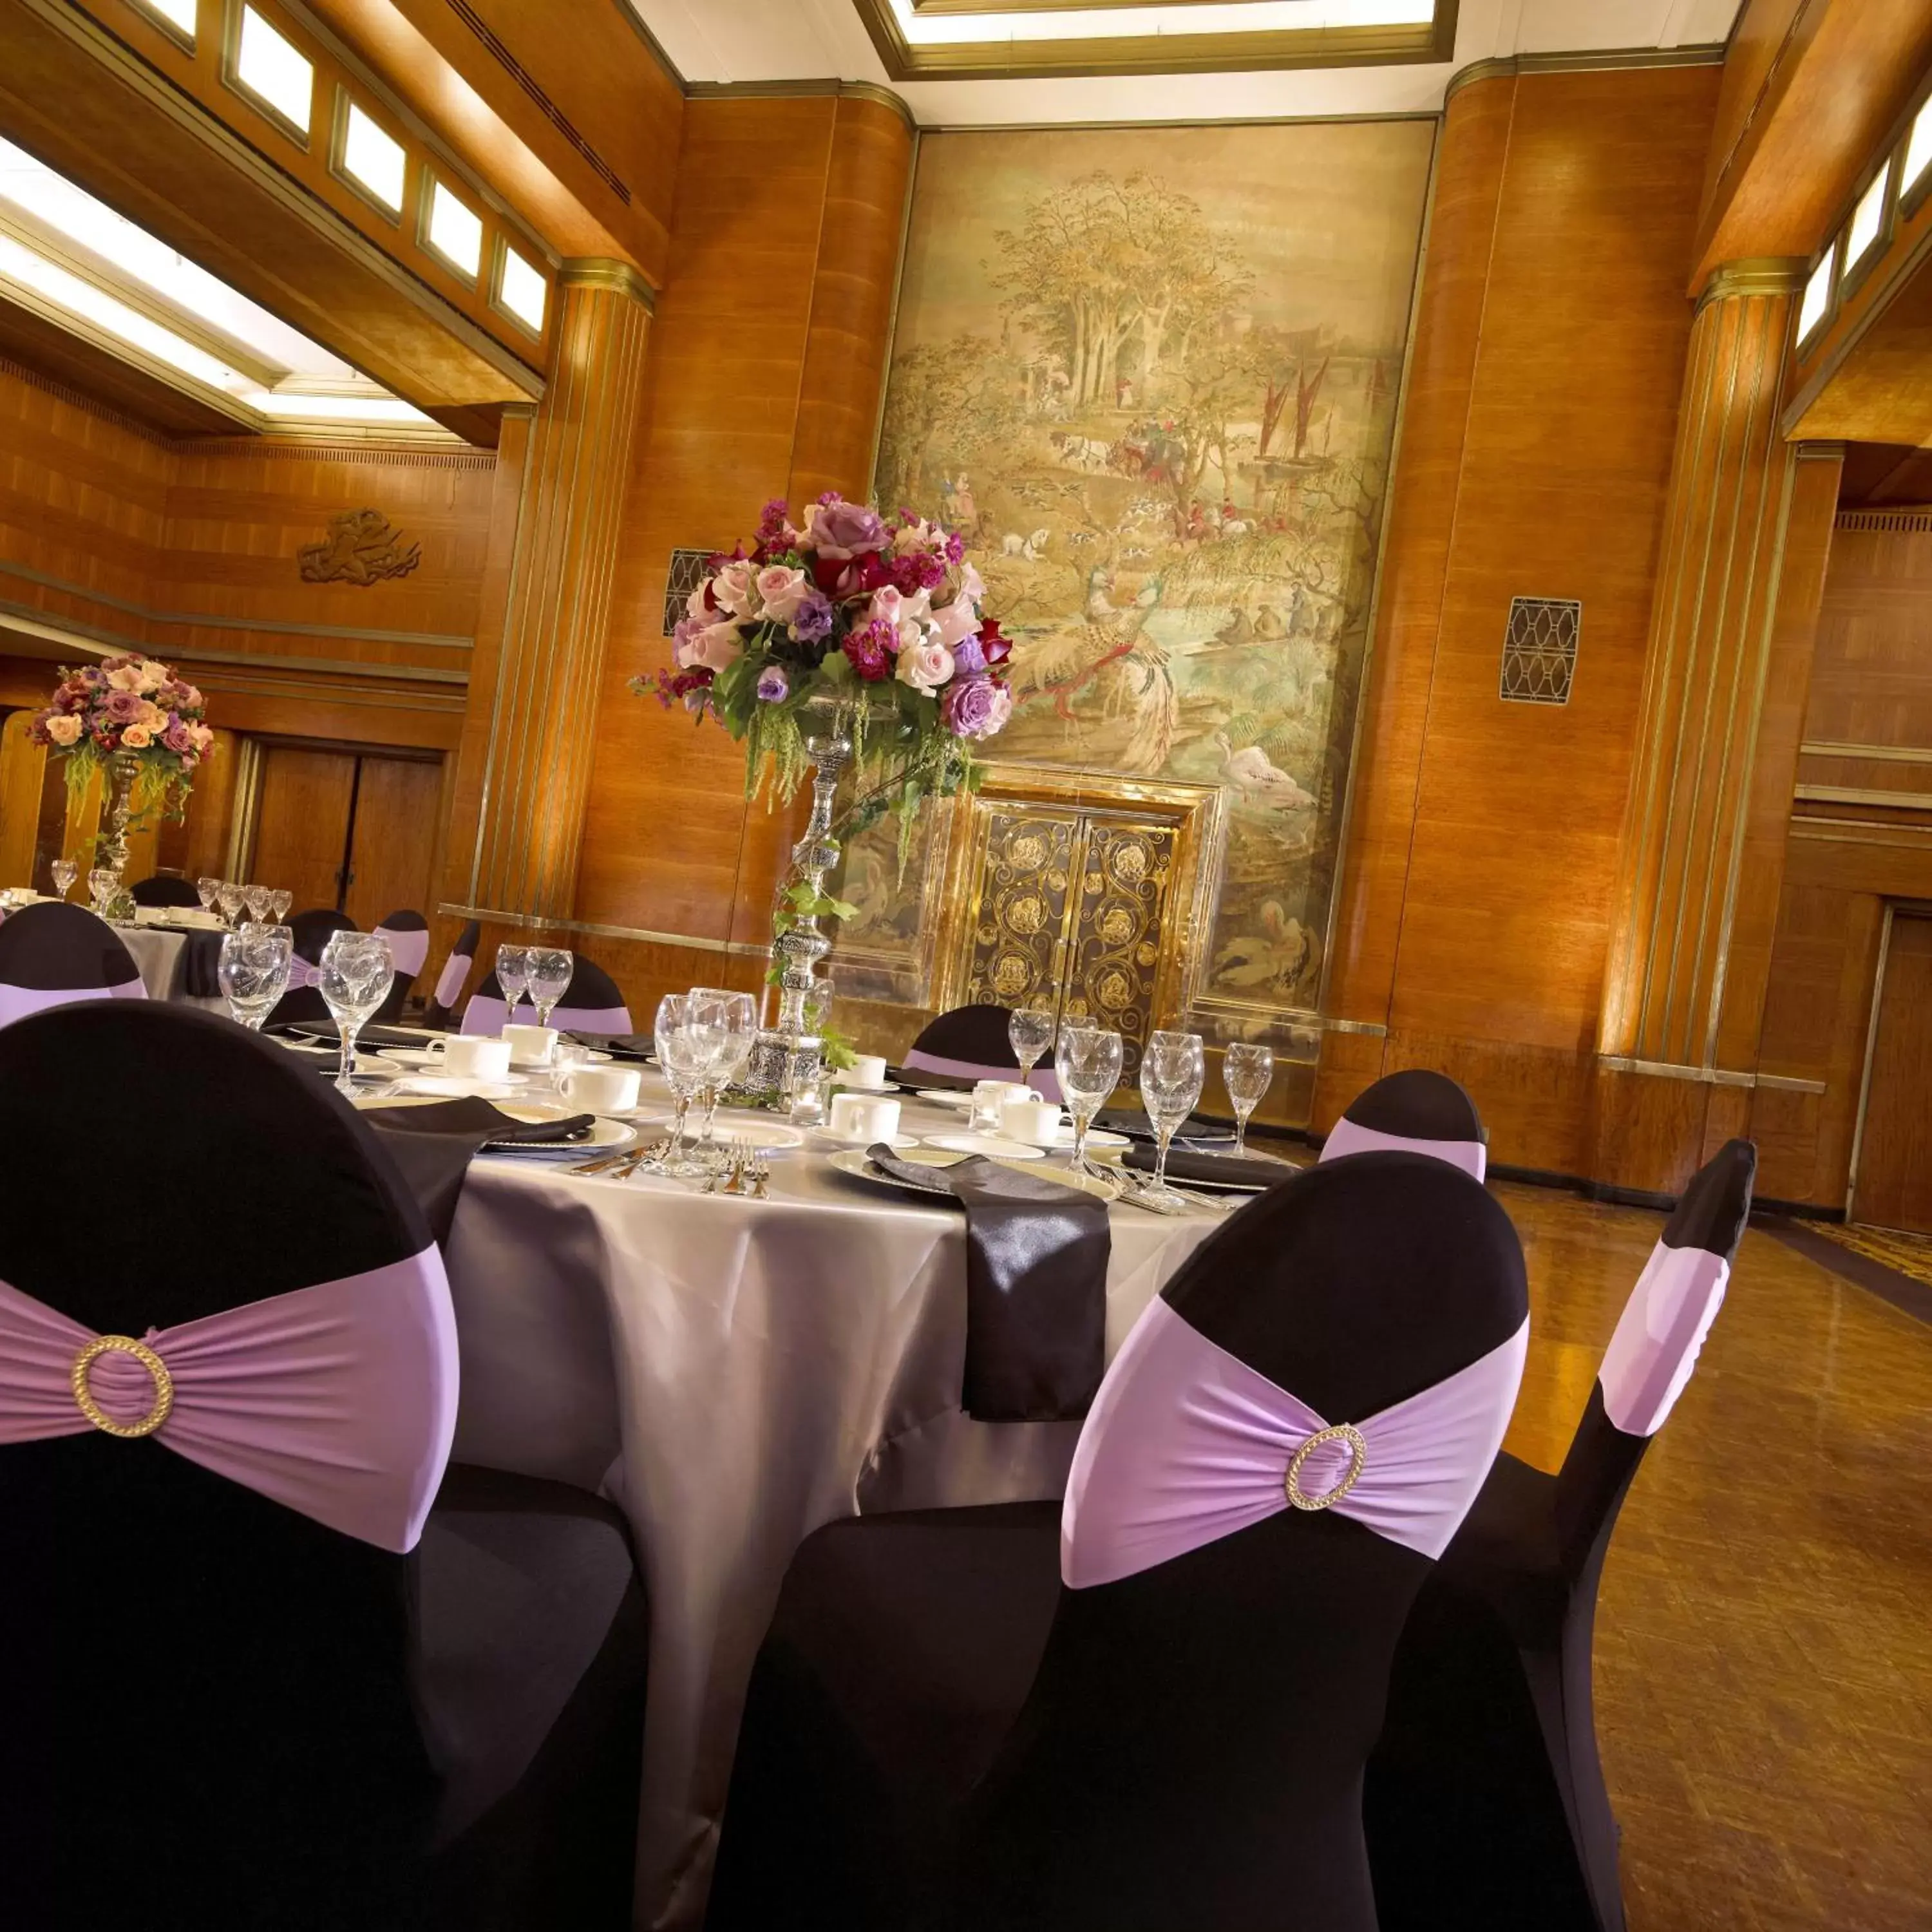 Banquet/Function facilities, Banquet Facilities in The Queen Mary